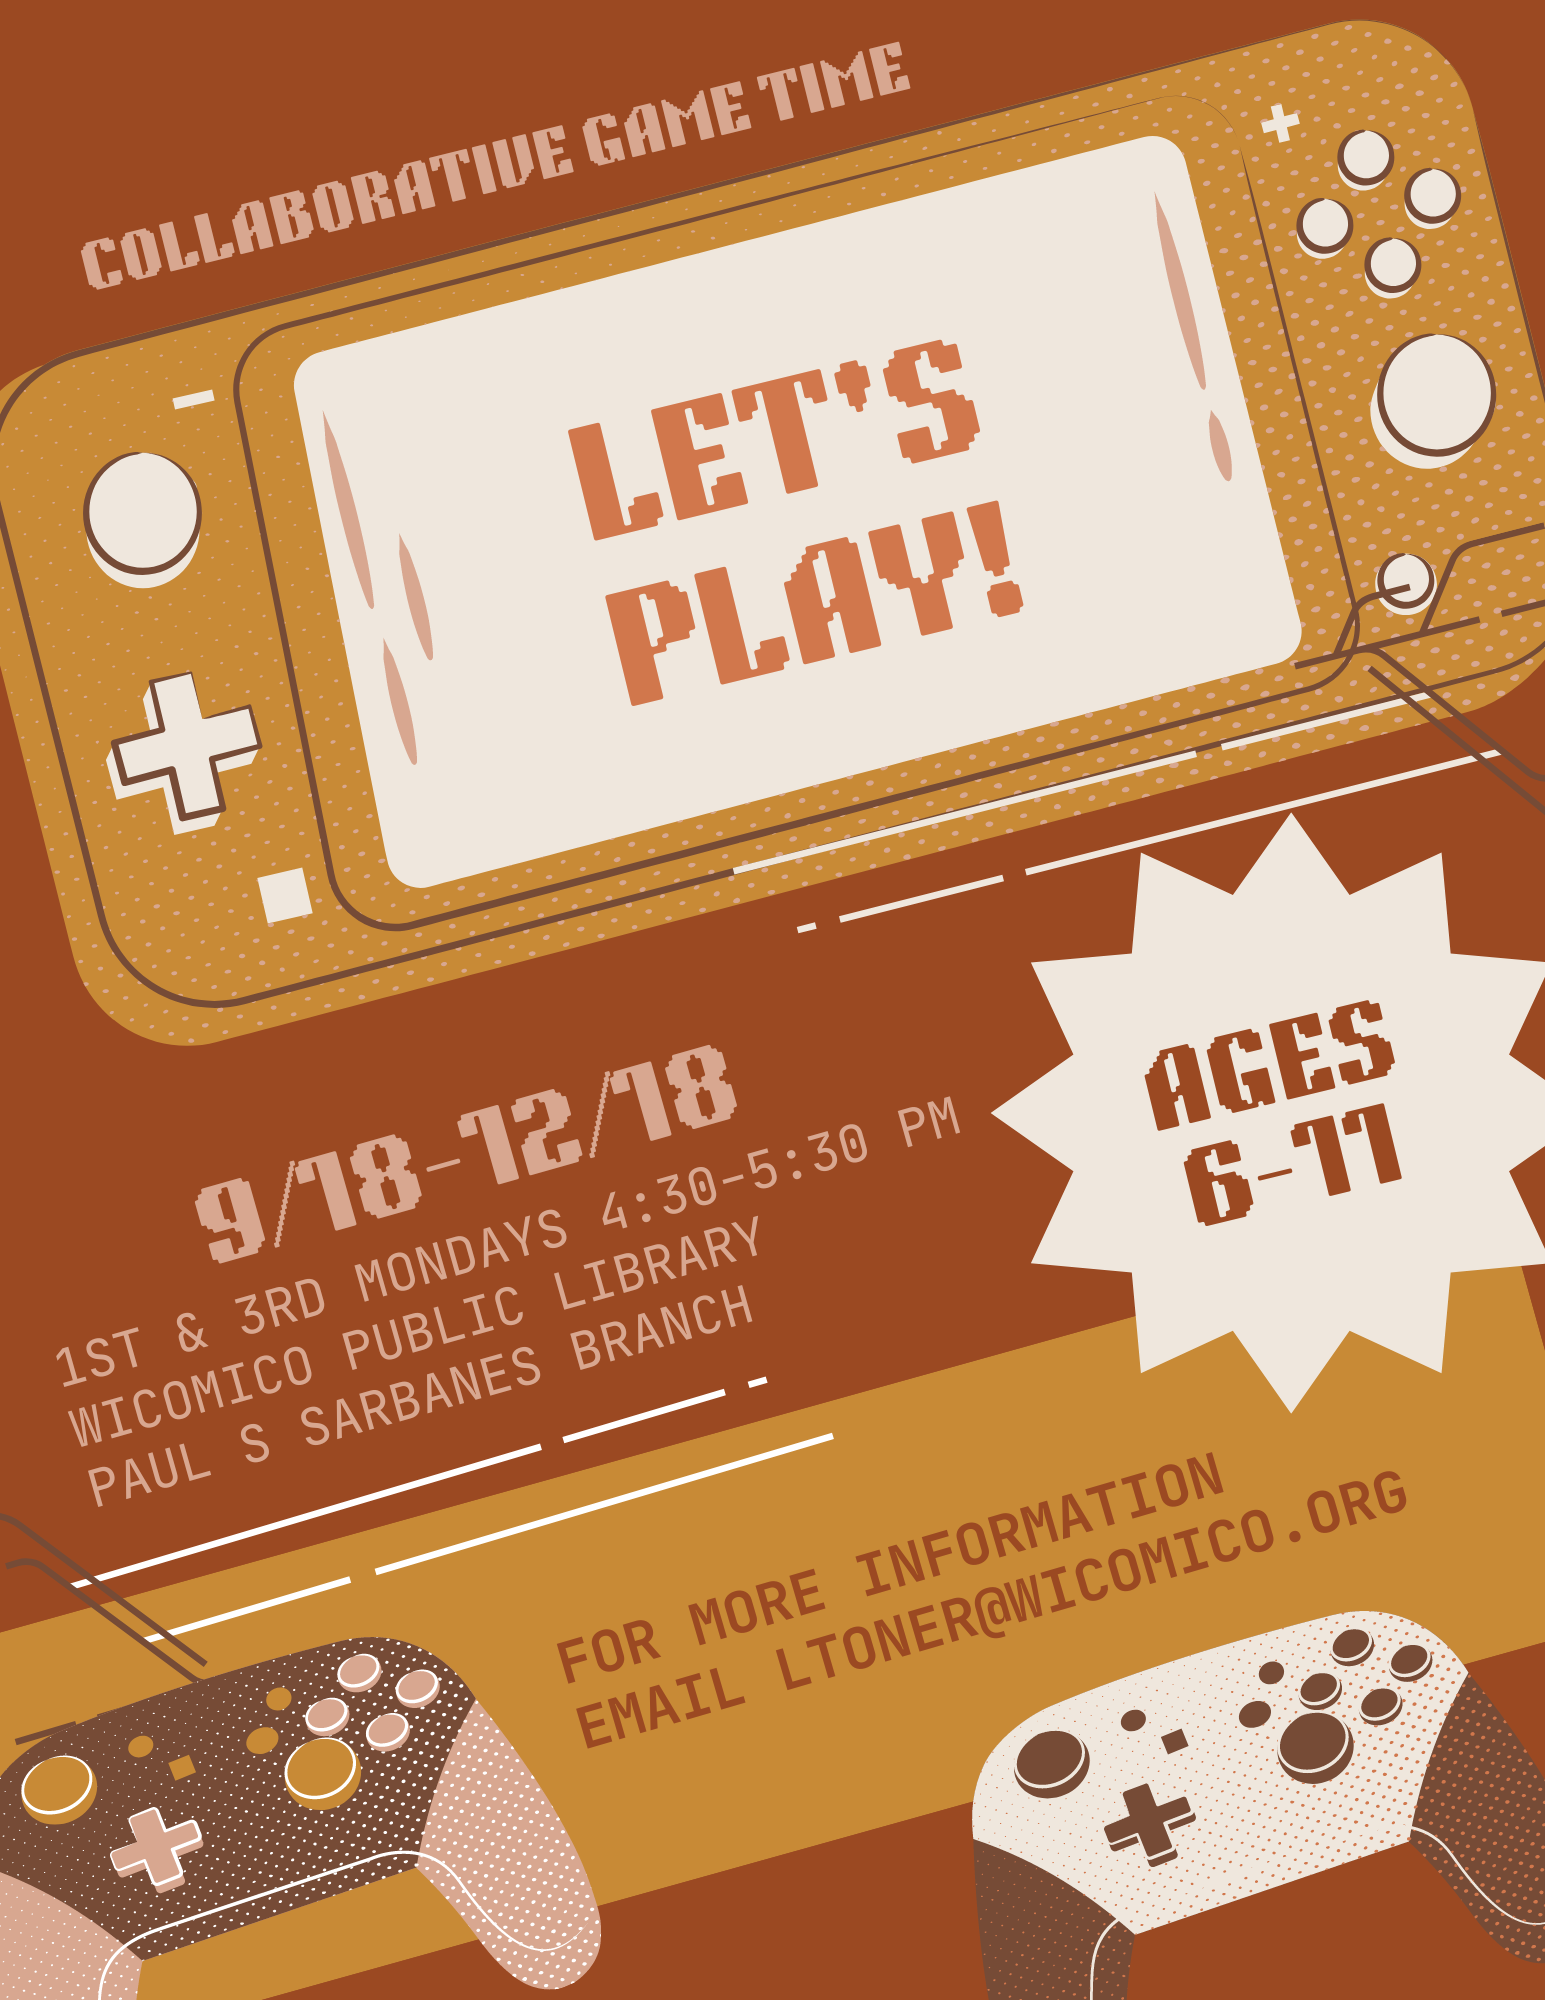 flyer with video game controllers. text reads "collaborative game time. let's play! 9/18 - 12/18. 1st and 3rd mondays 4:30 - 5:30 pm. wicomico public library. paul s sarbanes branch. ages 6-11. for more information contact ltoner@wicomico.org."